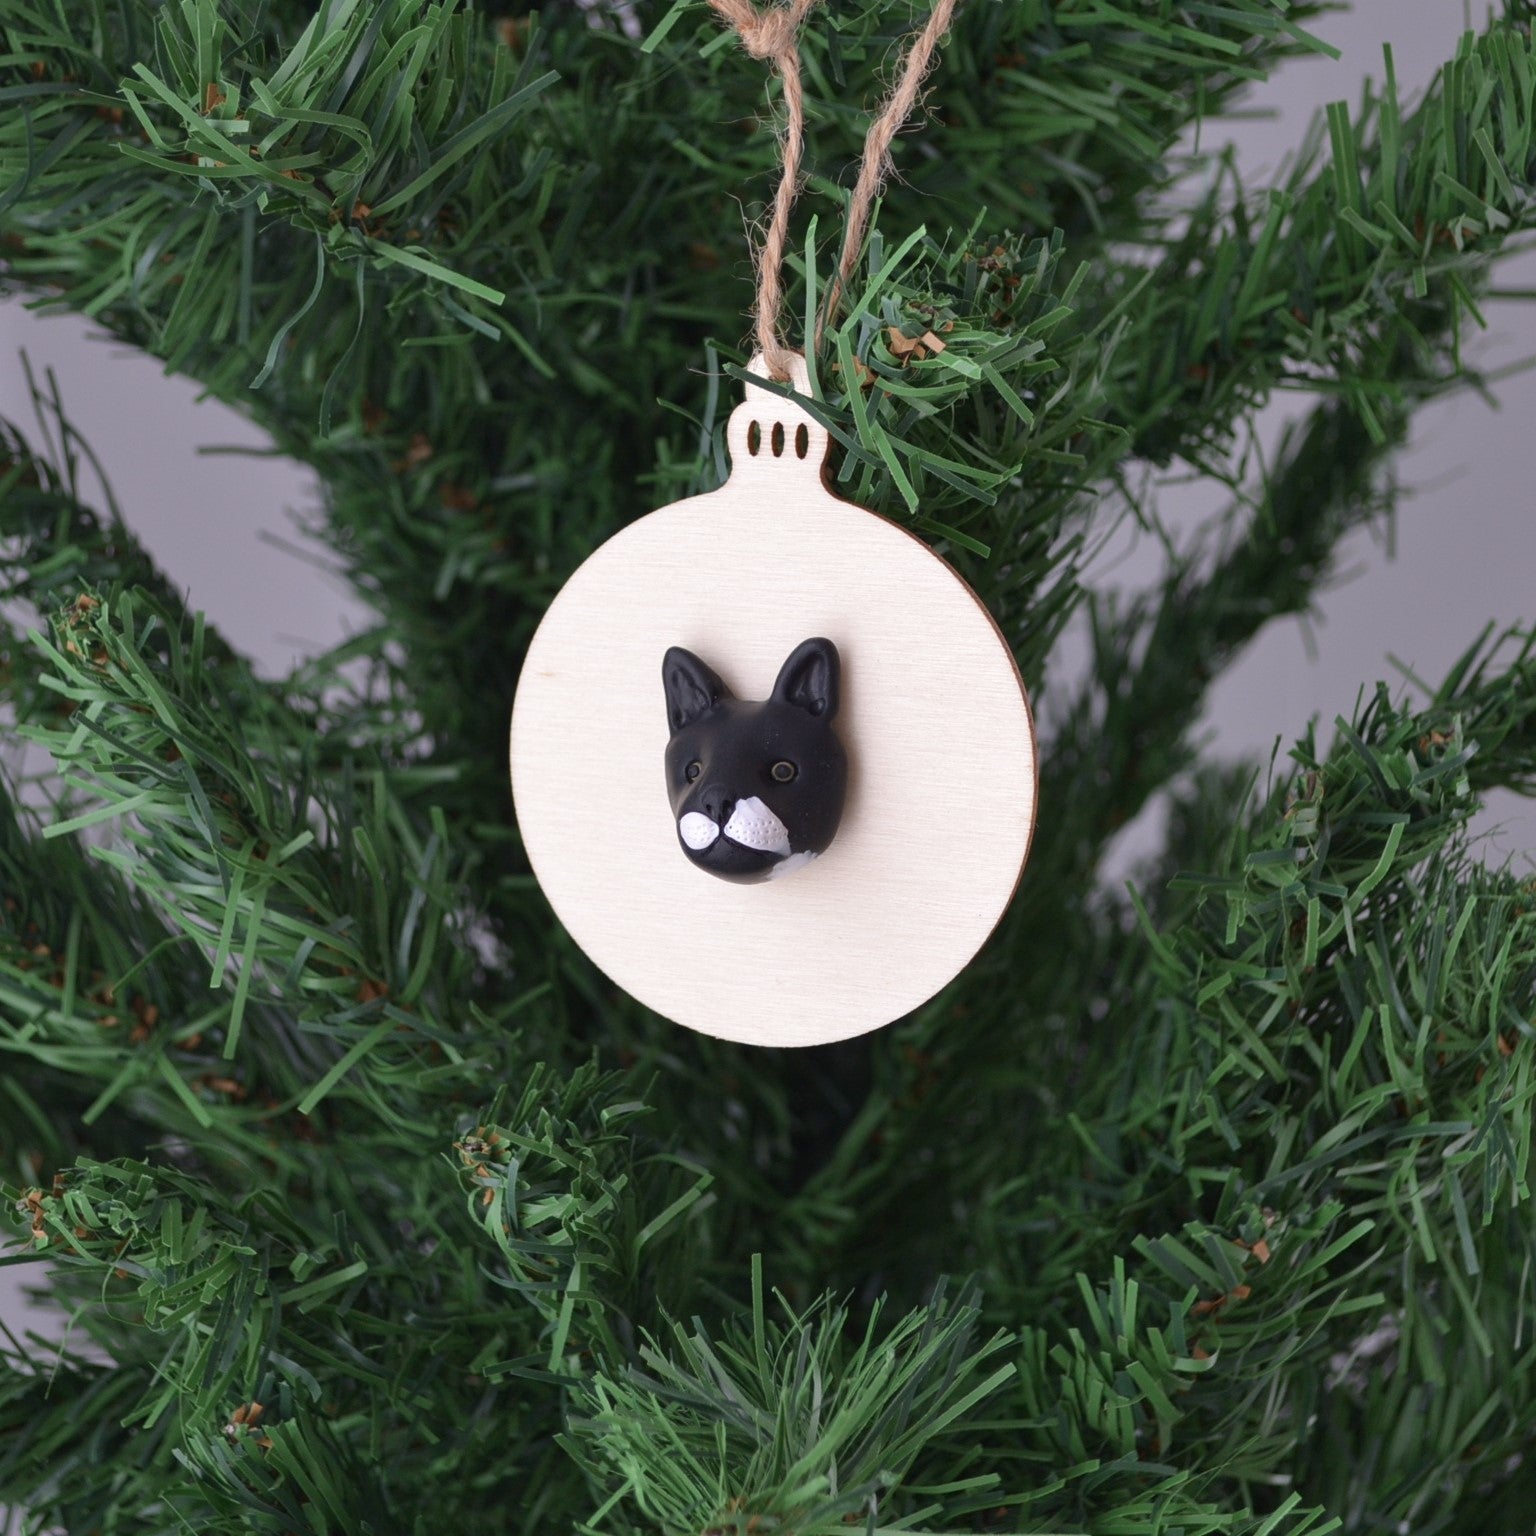 Bauble shaped christmas ornament with a handmade polymer clay cat face attached